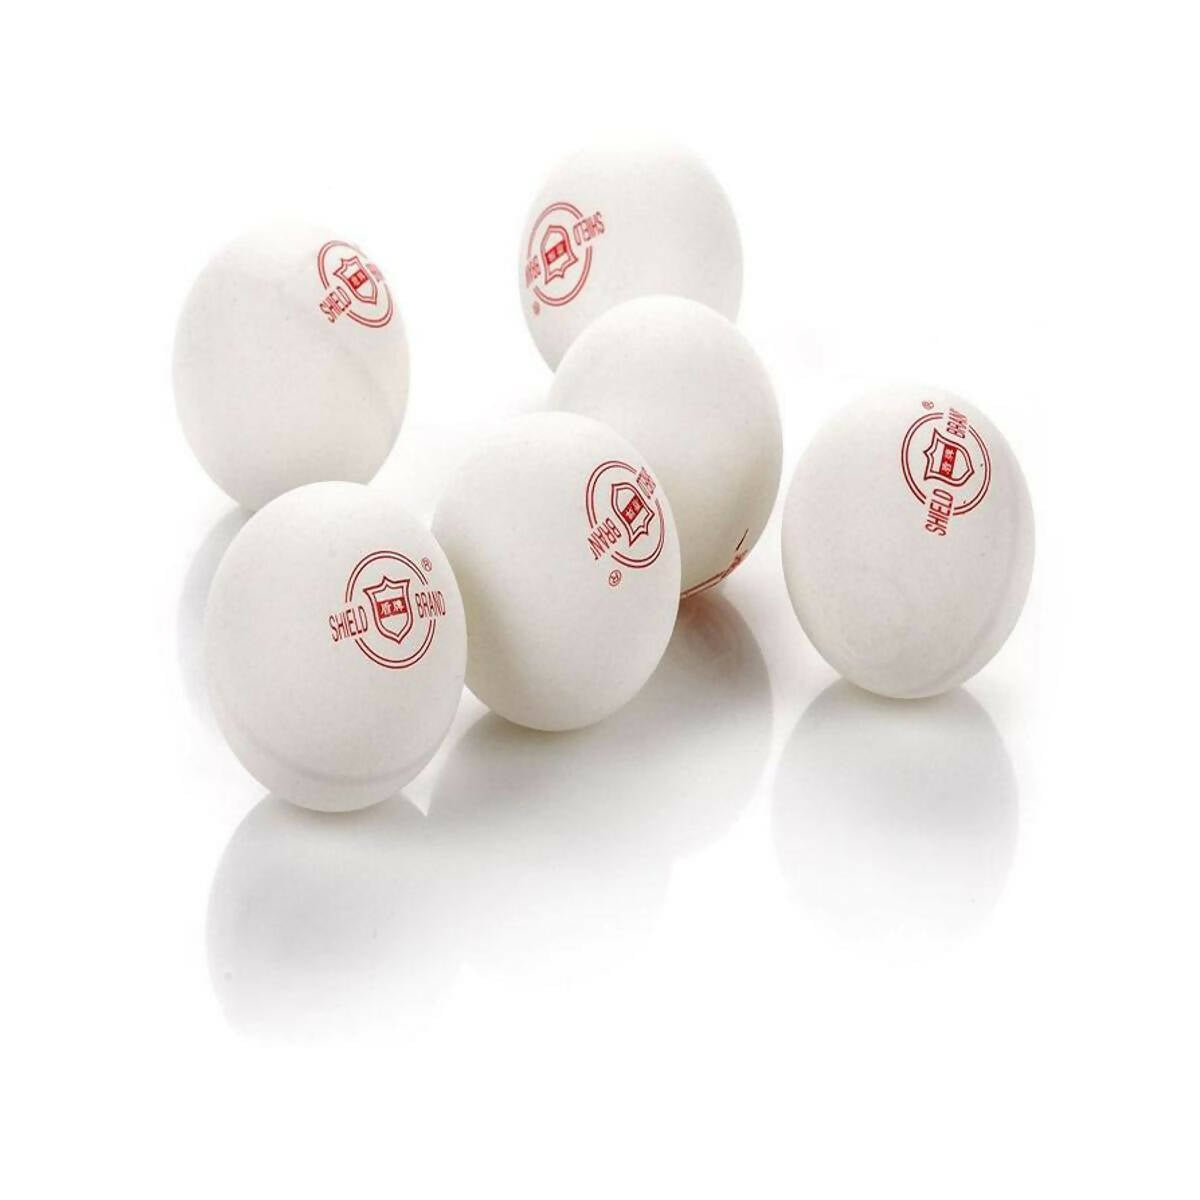 Pack of 6 - NEW SHIELD Table Tennis Ping Pong Balls - White